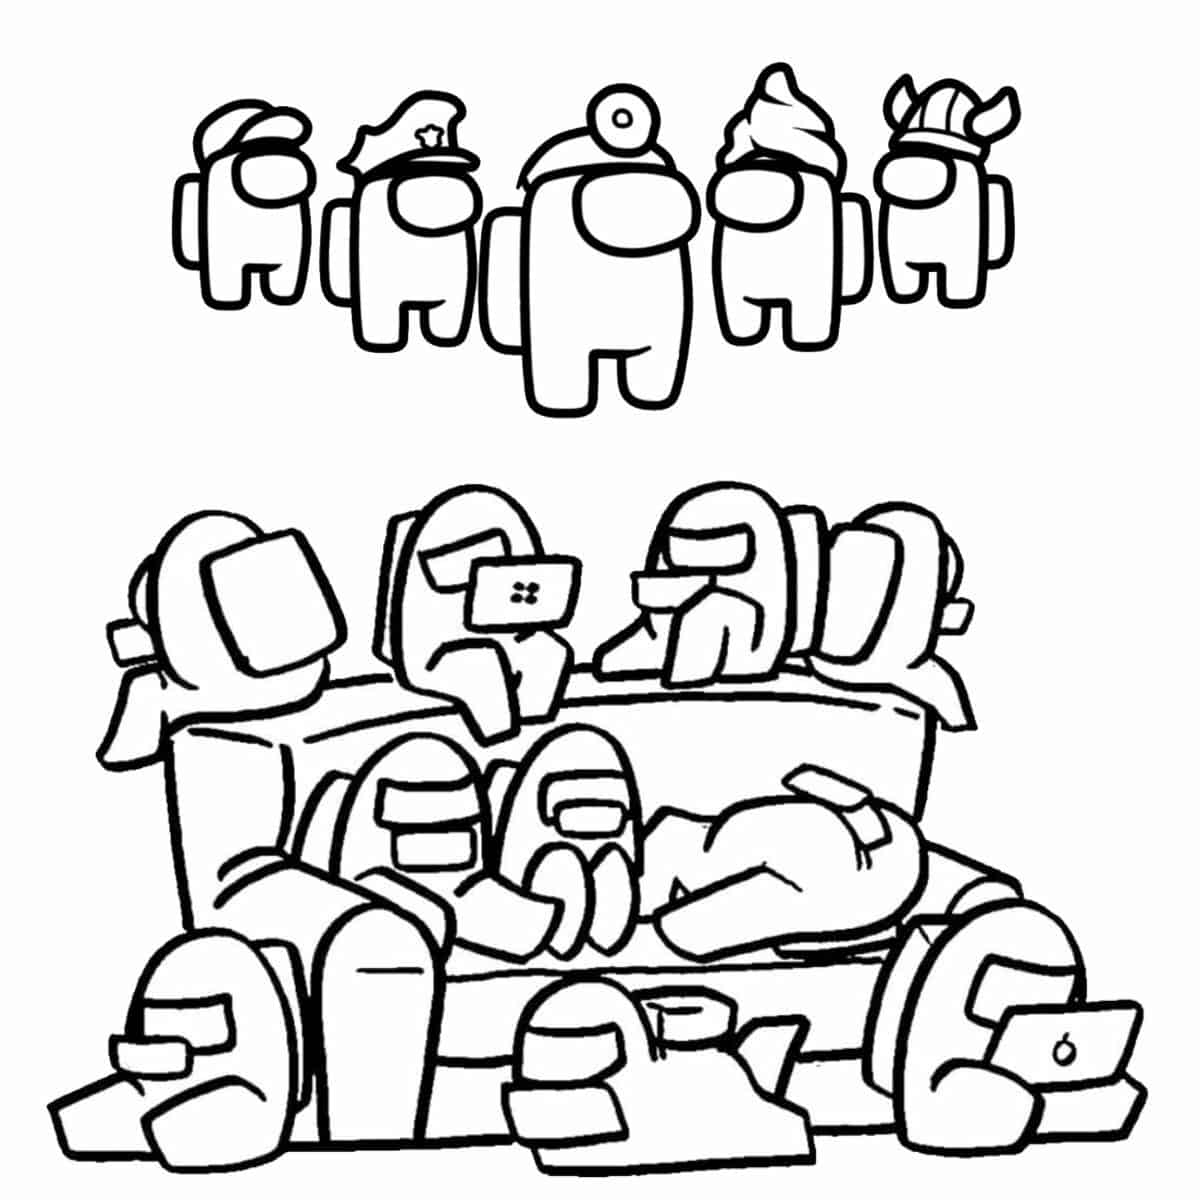 Among us coloring pages free to print